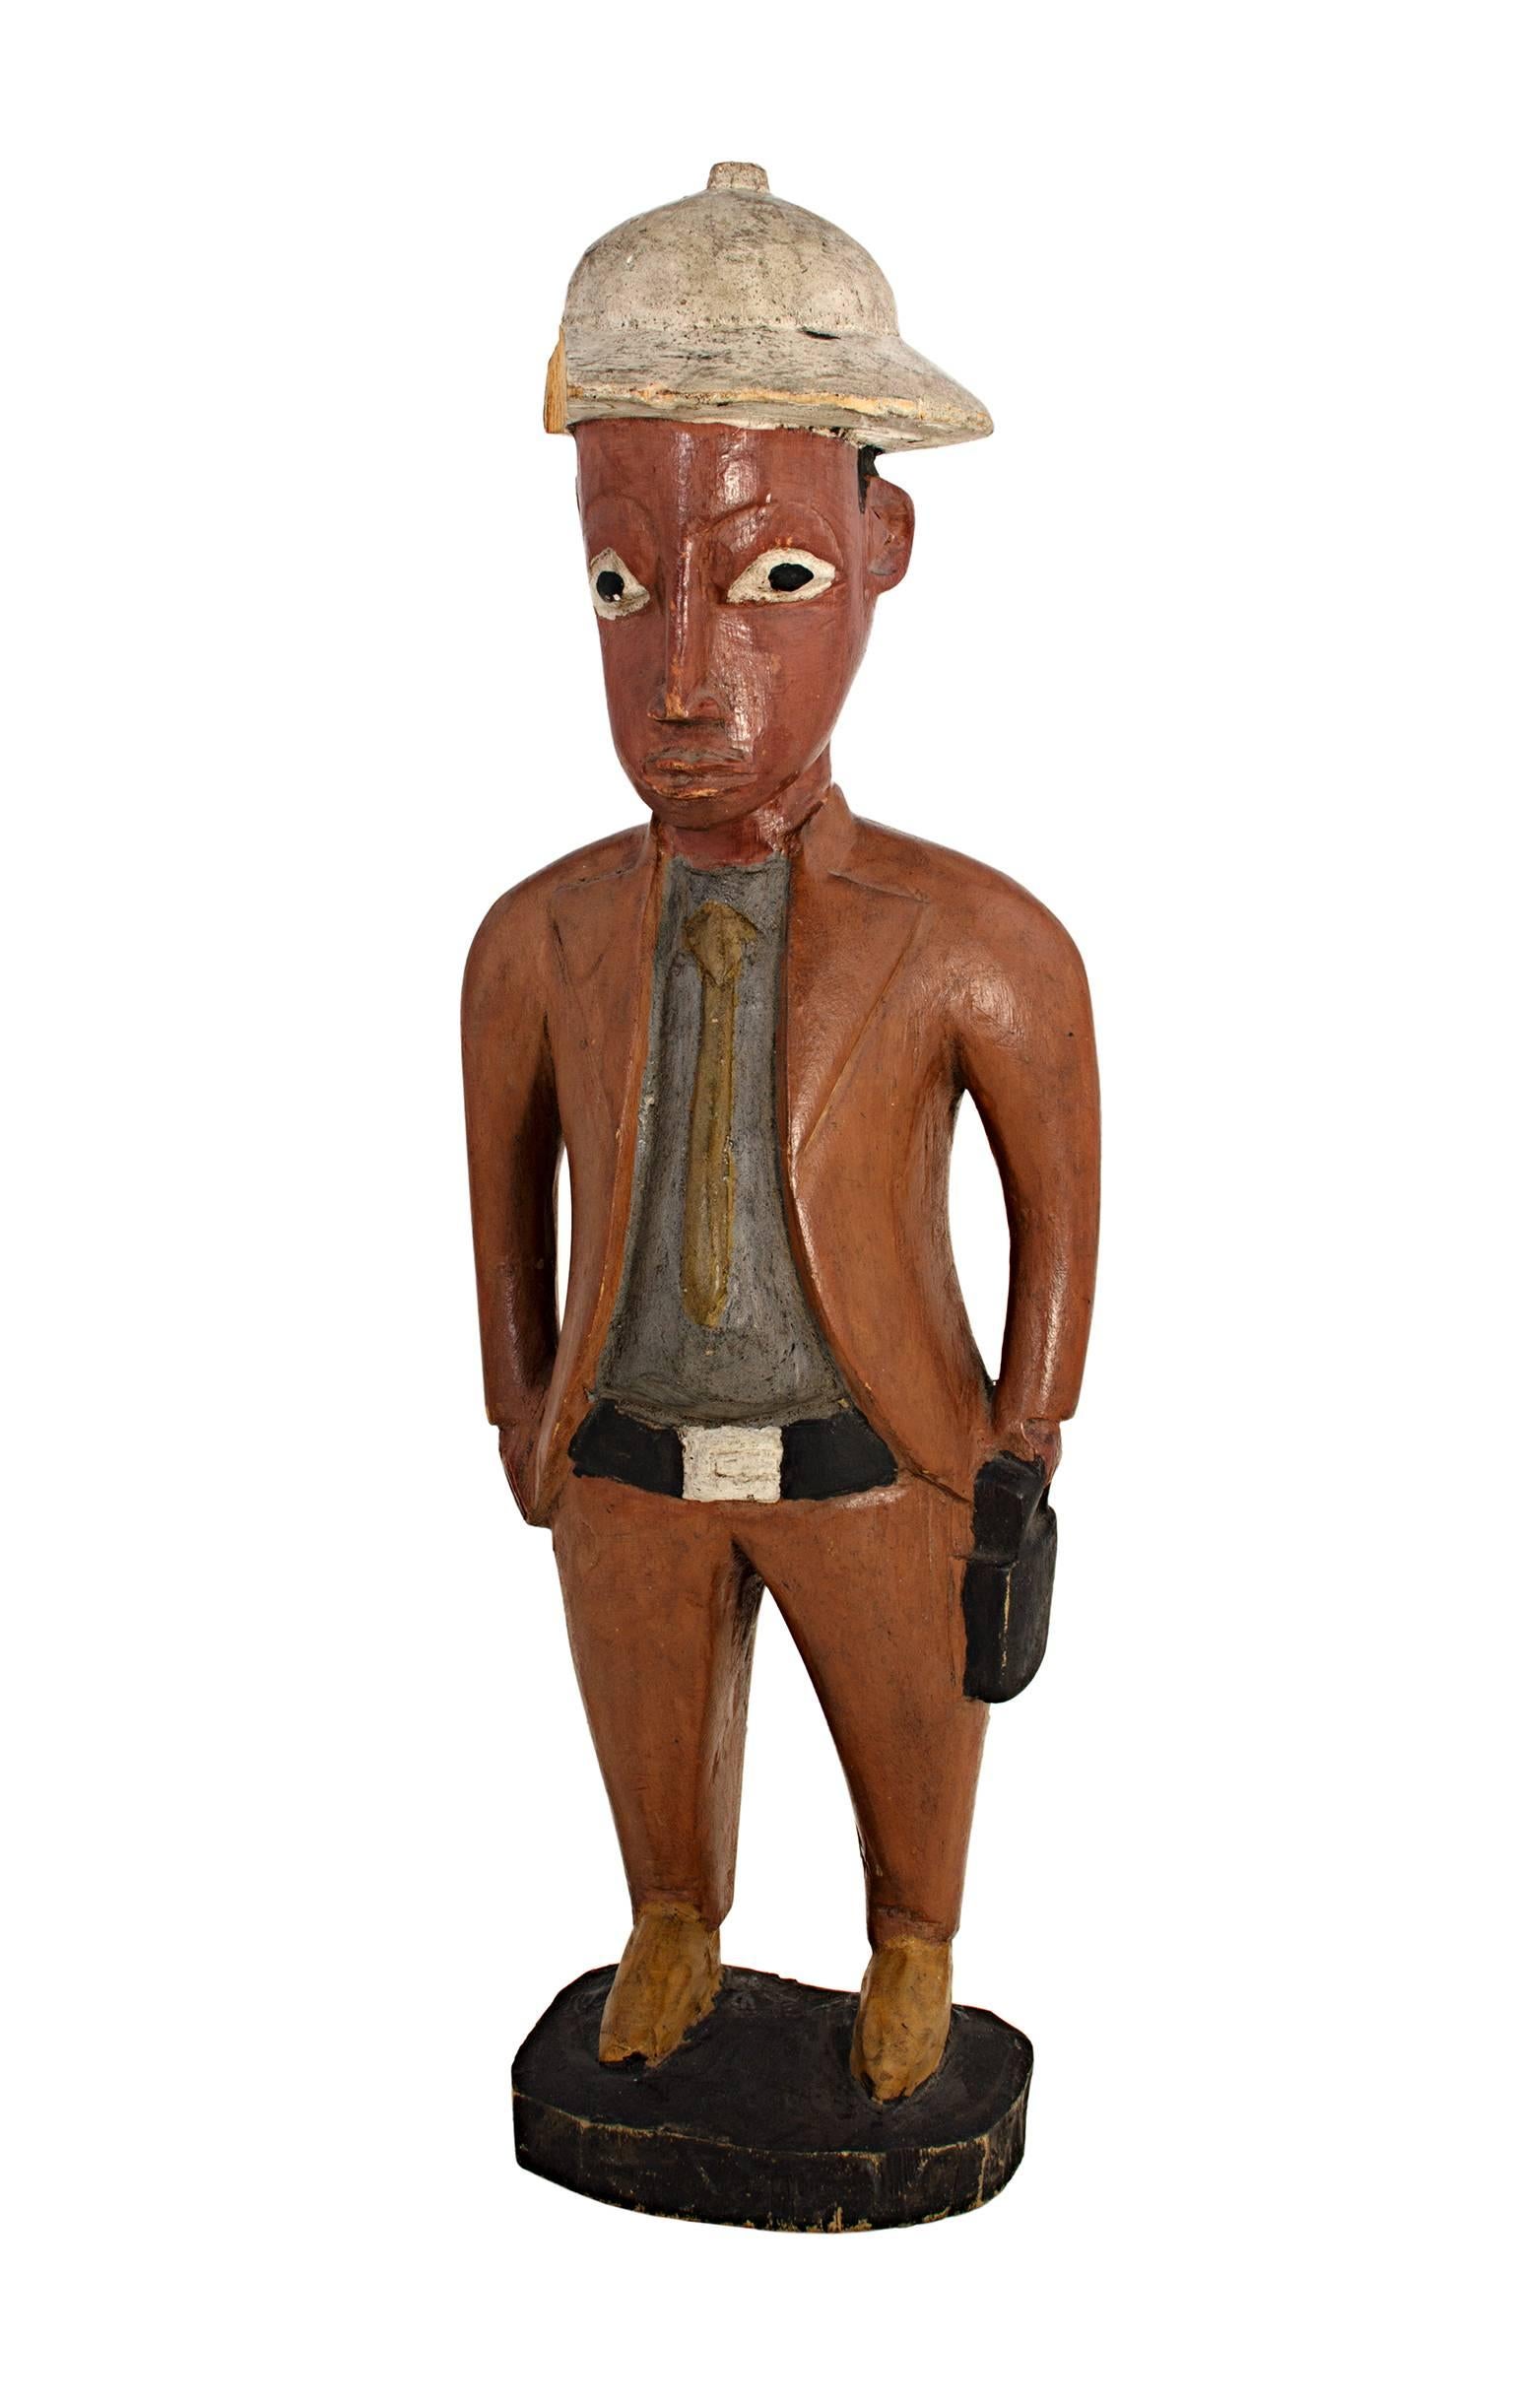 Unknown Figurative Sculpture - "Baule Colonial Sculpture Ivory Coast, " Carved Wood Statue created circa 1910